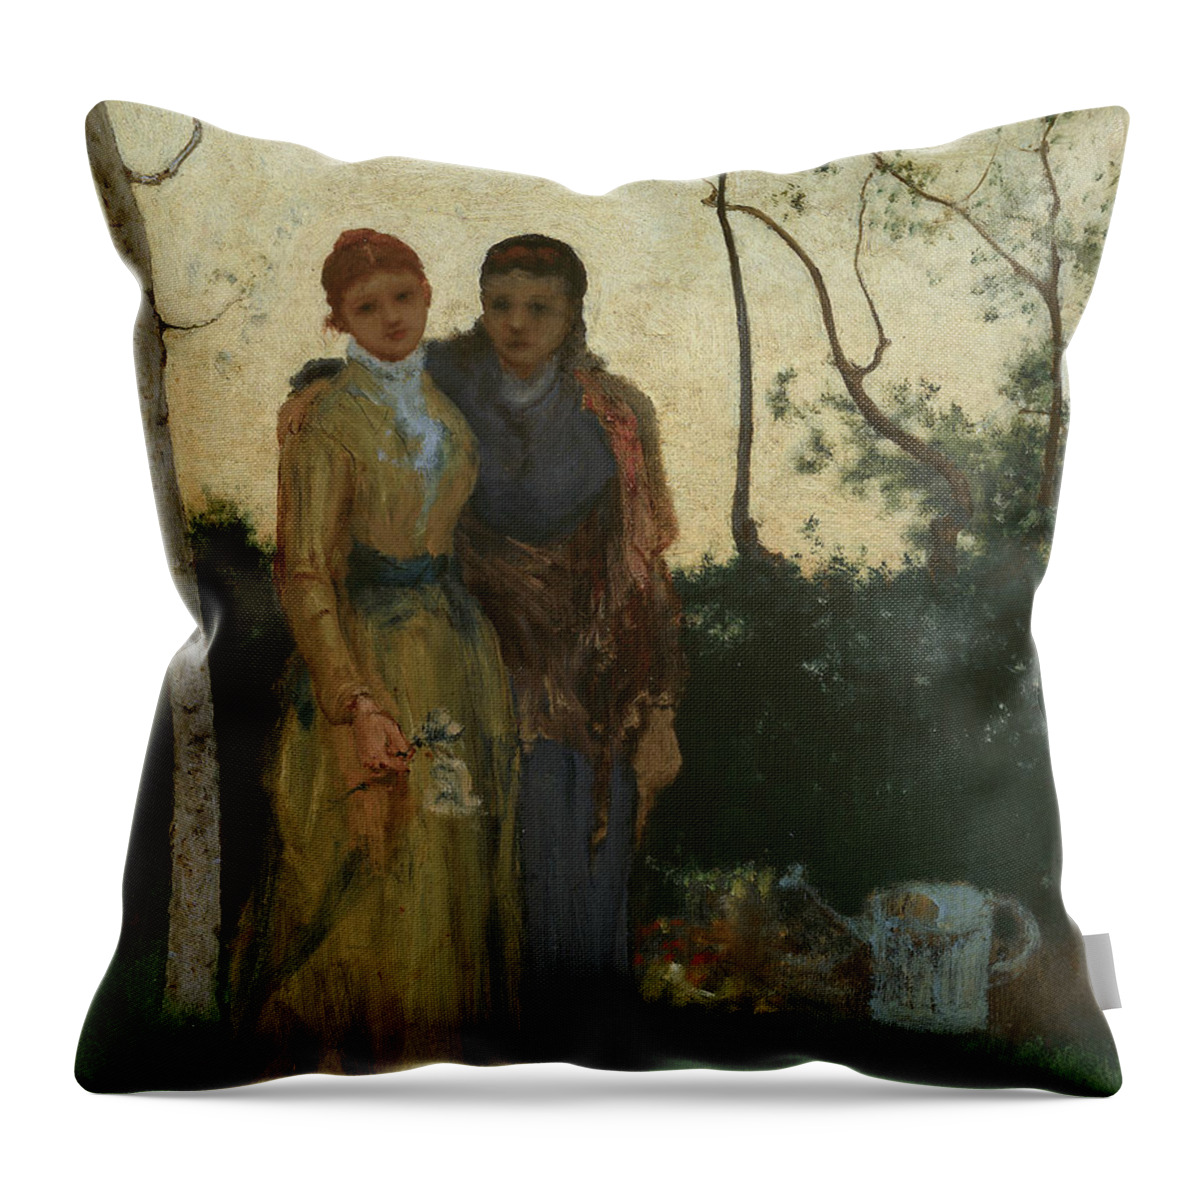 19th Century Art Throw Pillow featuring the painting The Sisters by George Inness